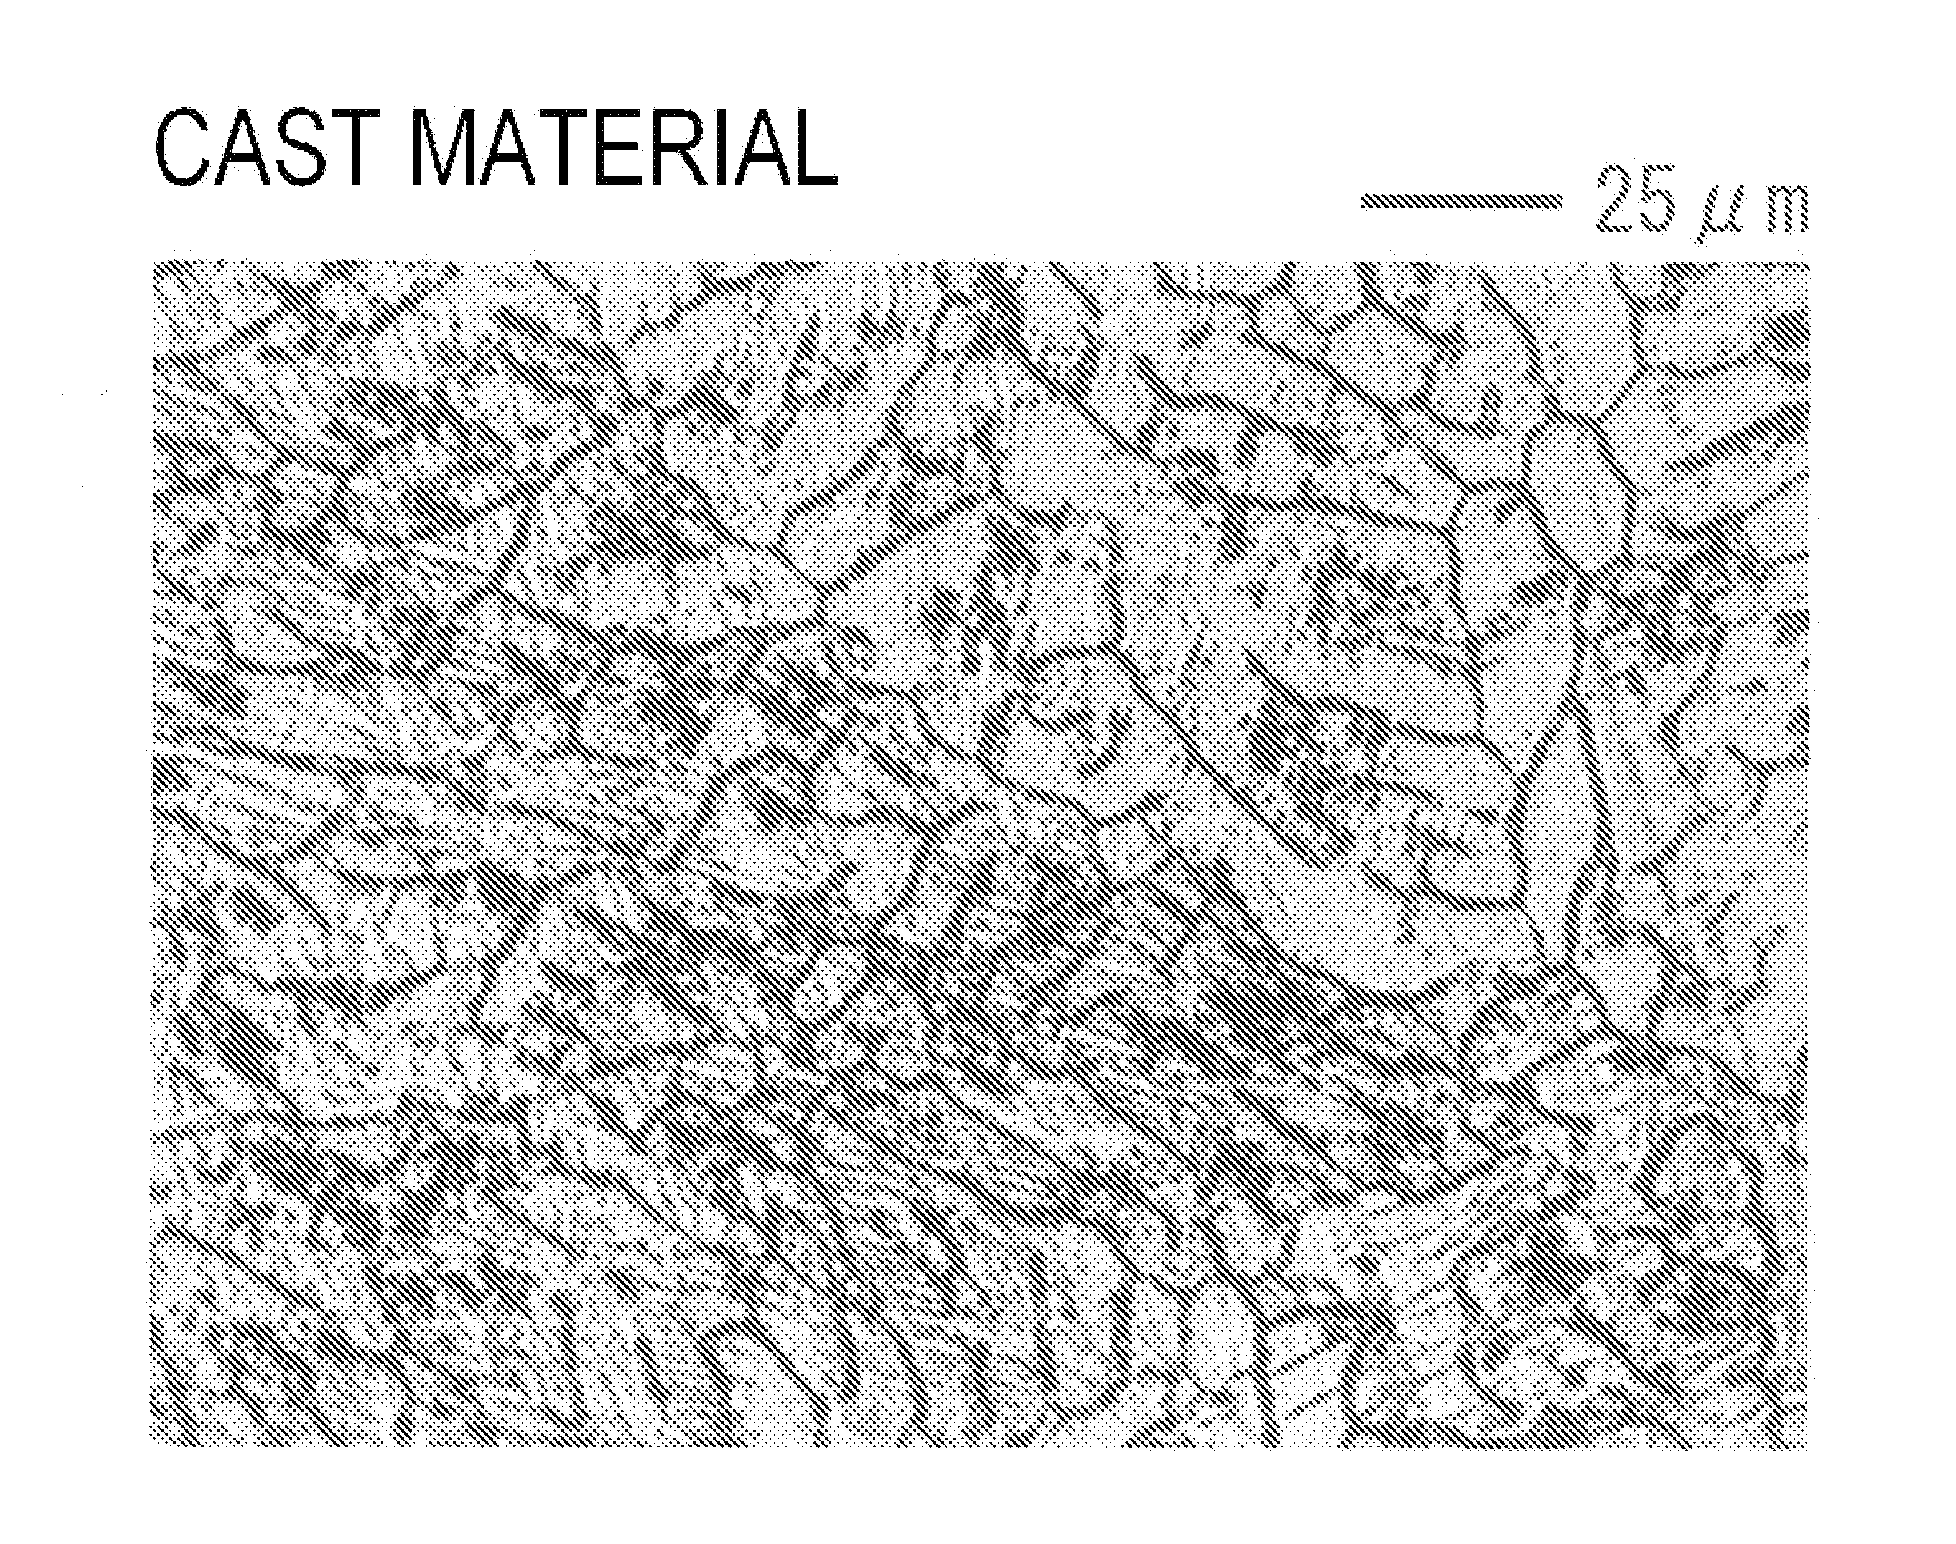 Linear object composed of magnesium alloy, bolt, nut, and washer